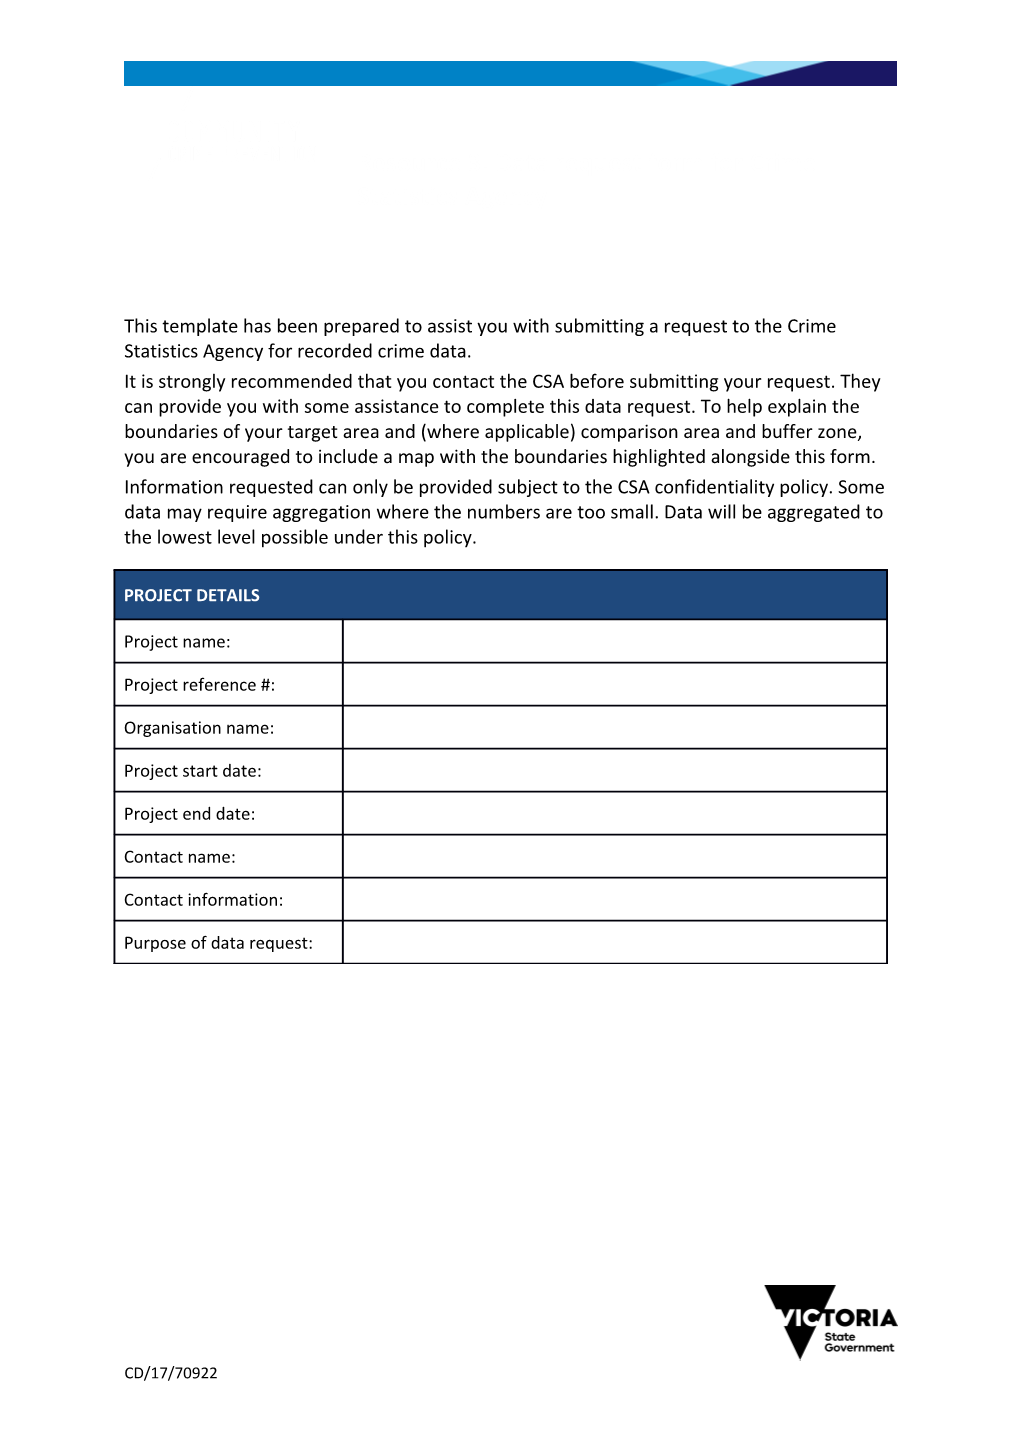 Resource 3: Data Request Form for Crime Statistics Agency